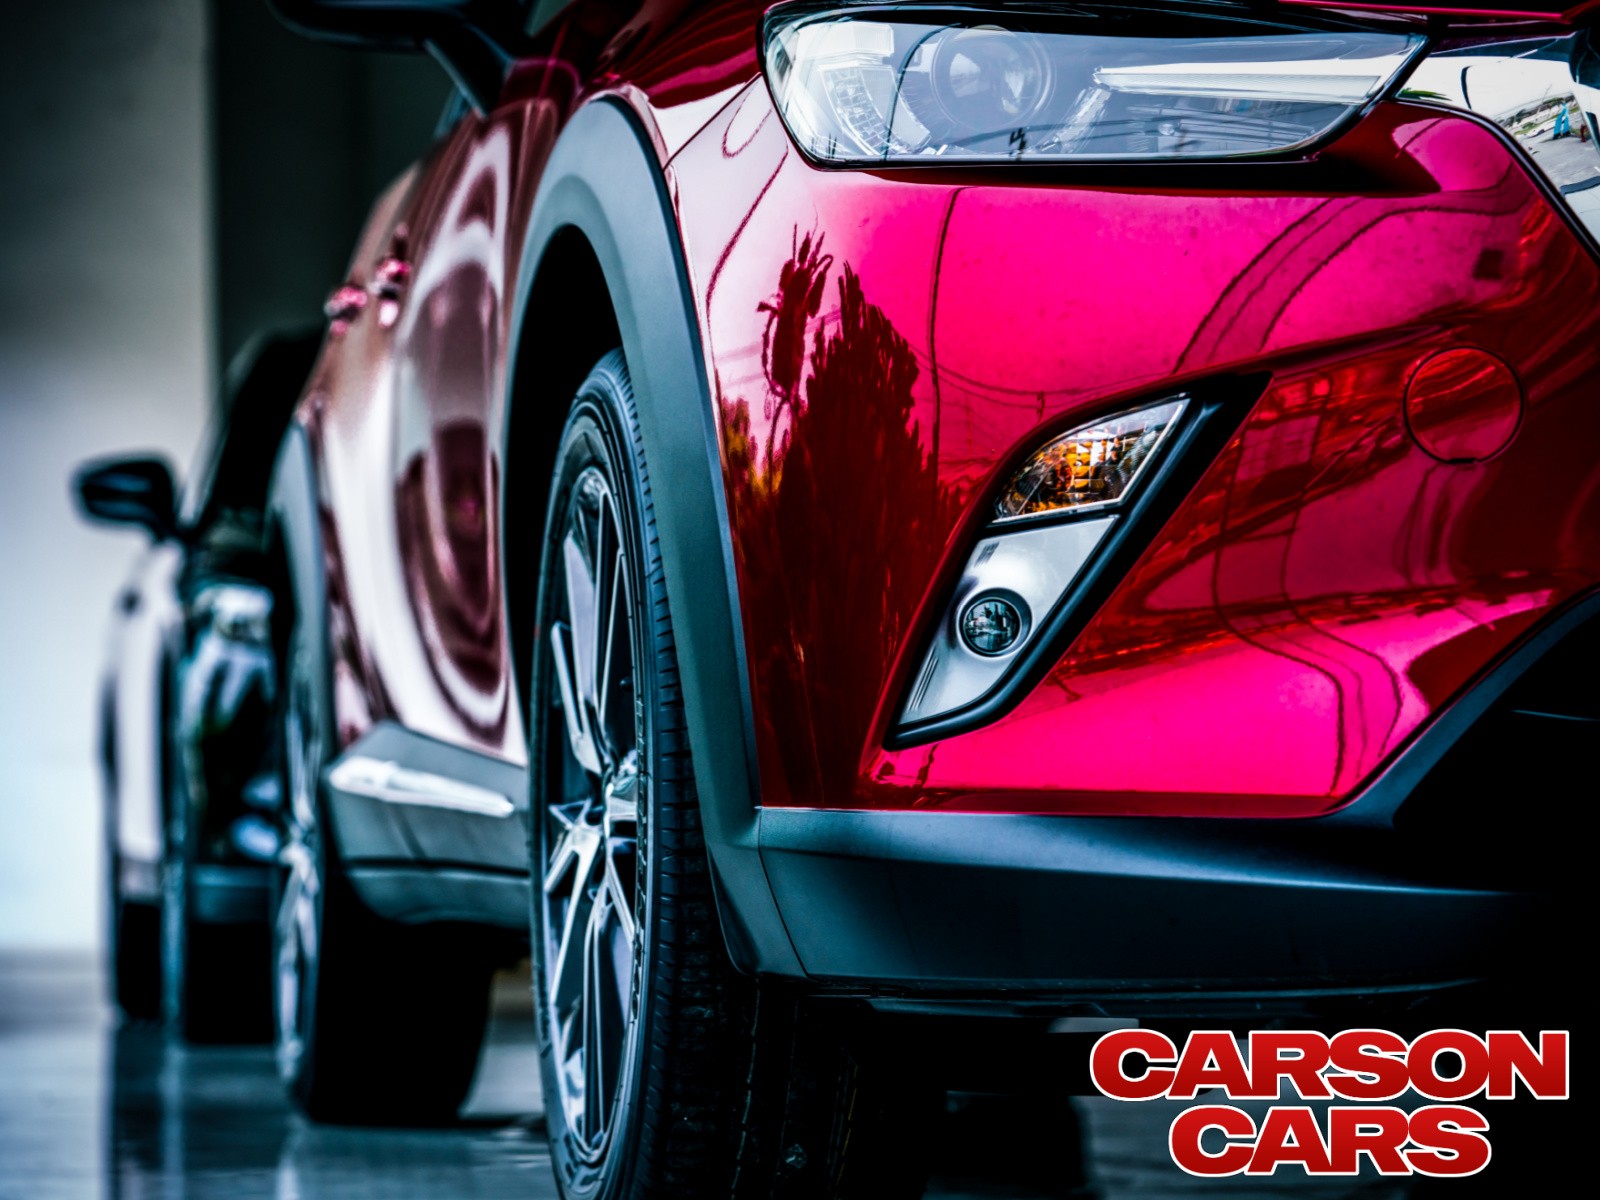 Carson Cars: For Affordable Car Loan Options Every Day!